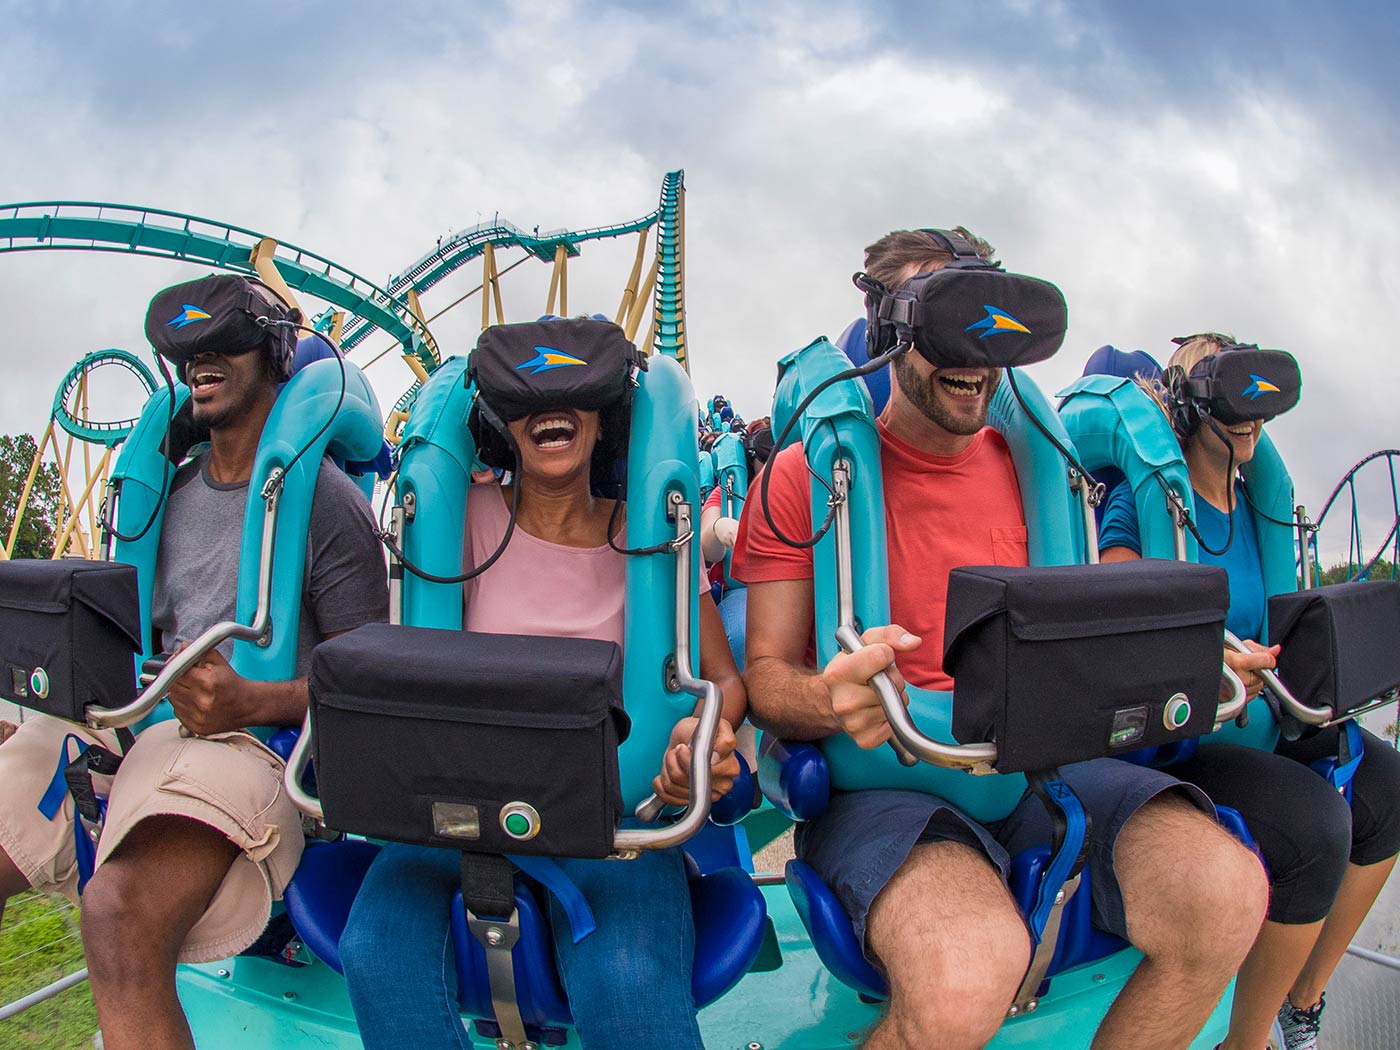 people on roller coaster wearing virtual reality headsets